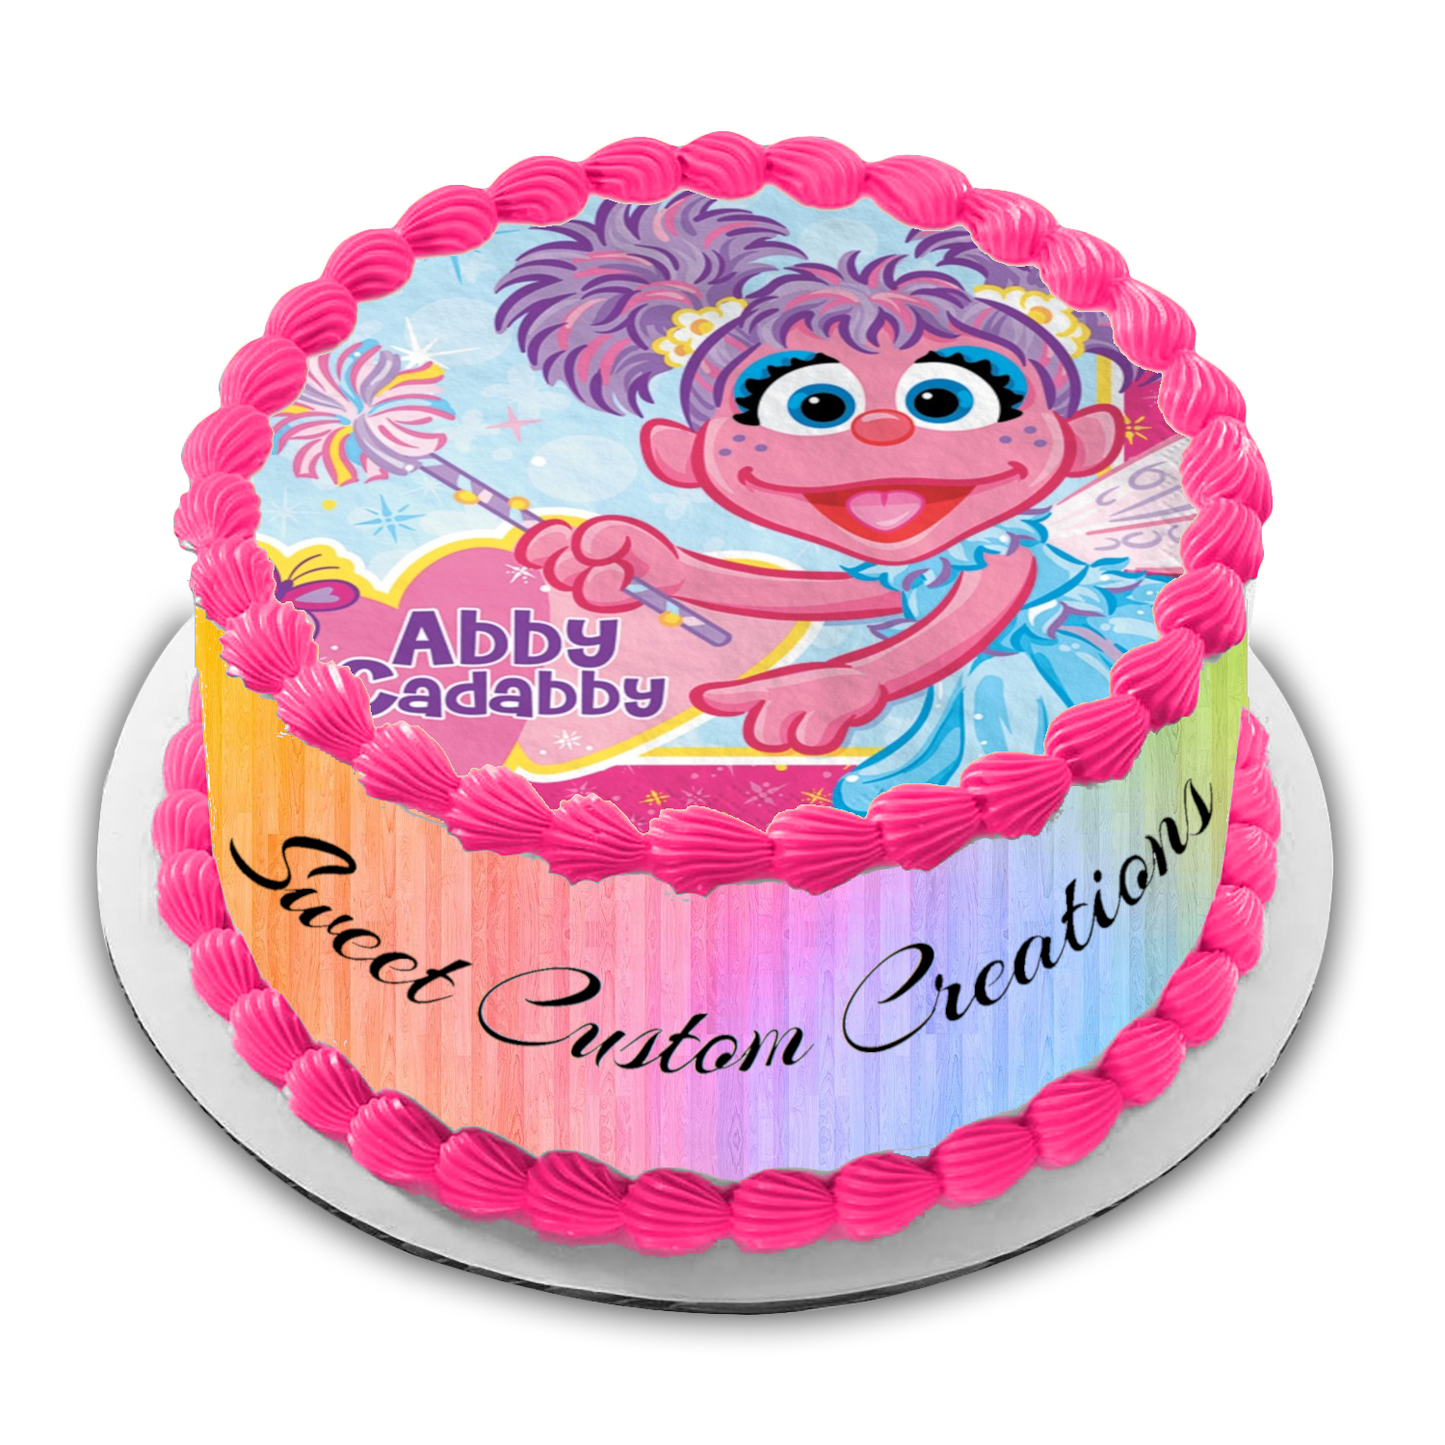 Abby Cadabby Edible Image Frosting Sheet #1 (70+ sizes)